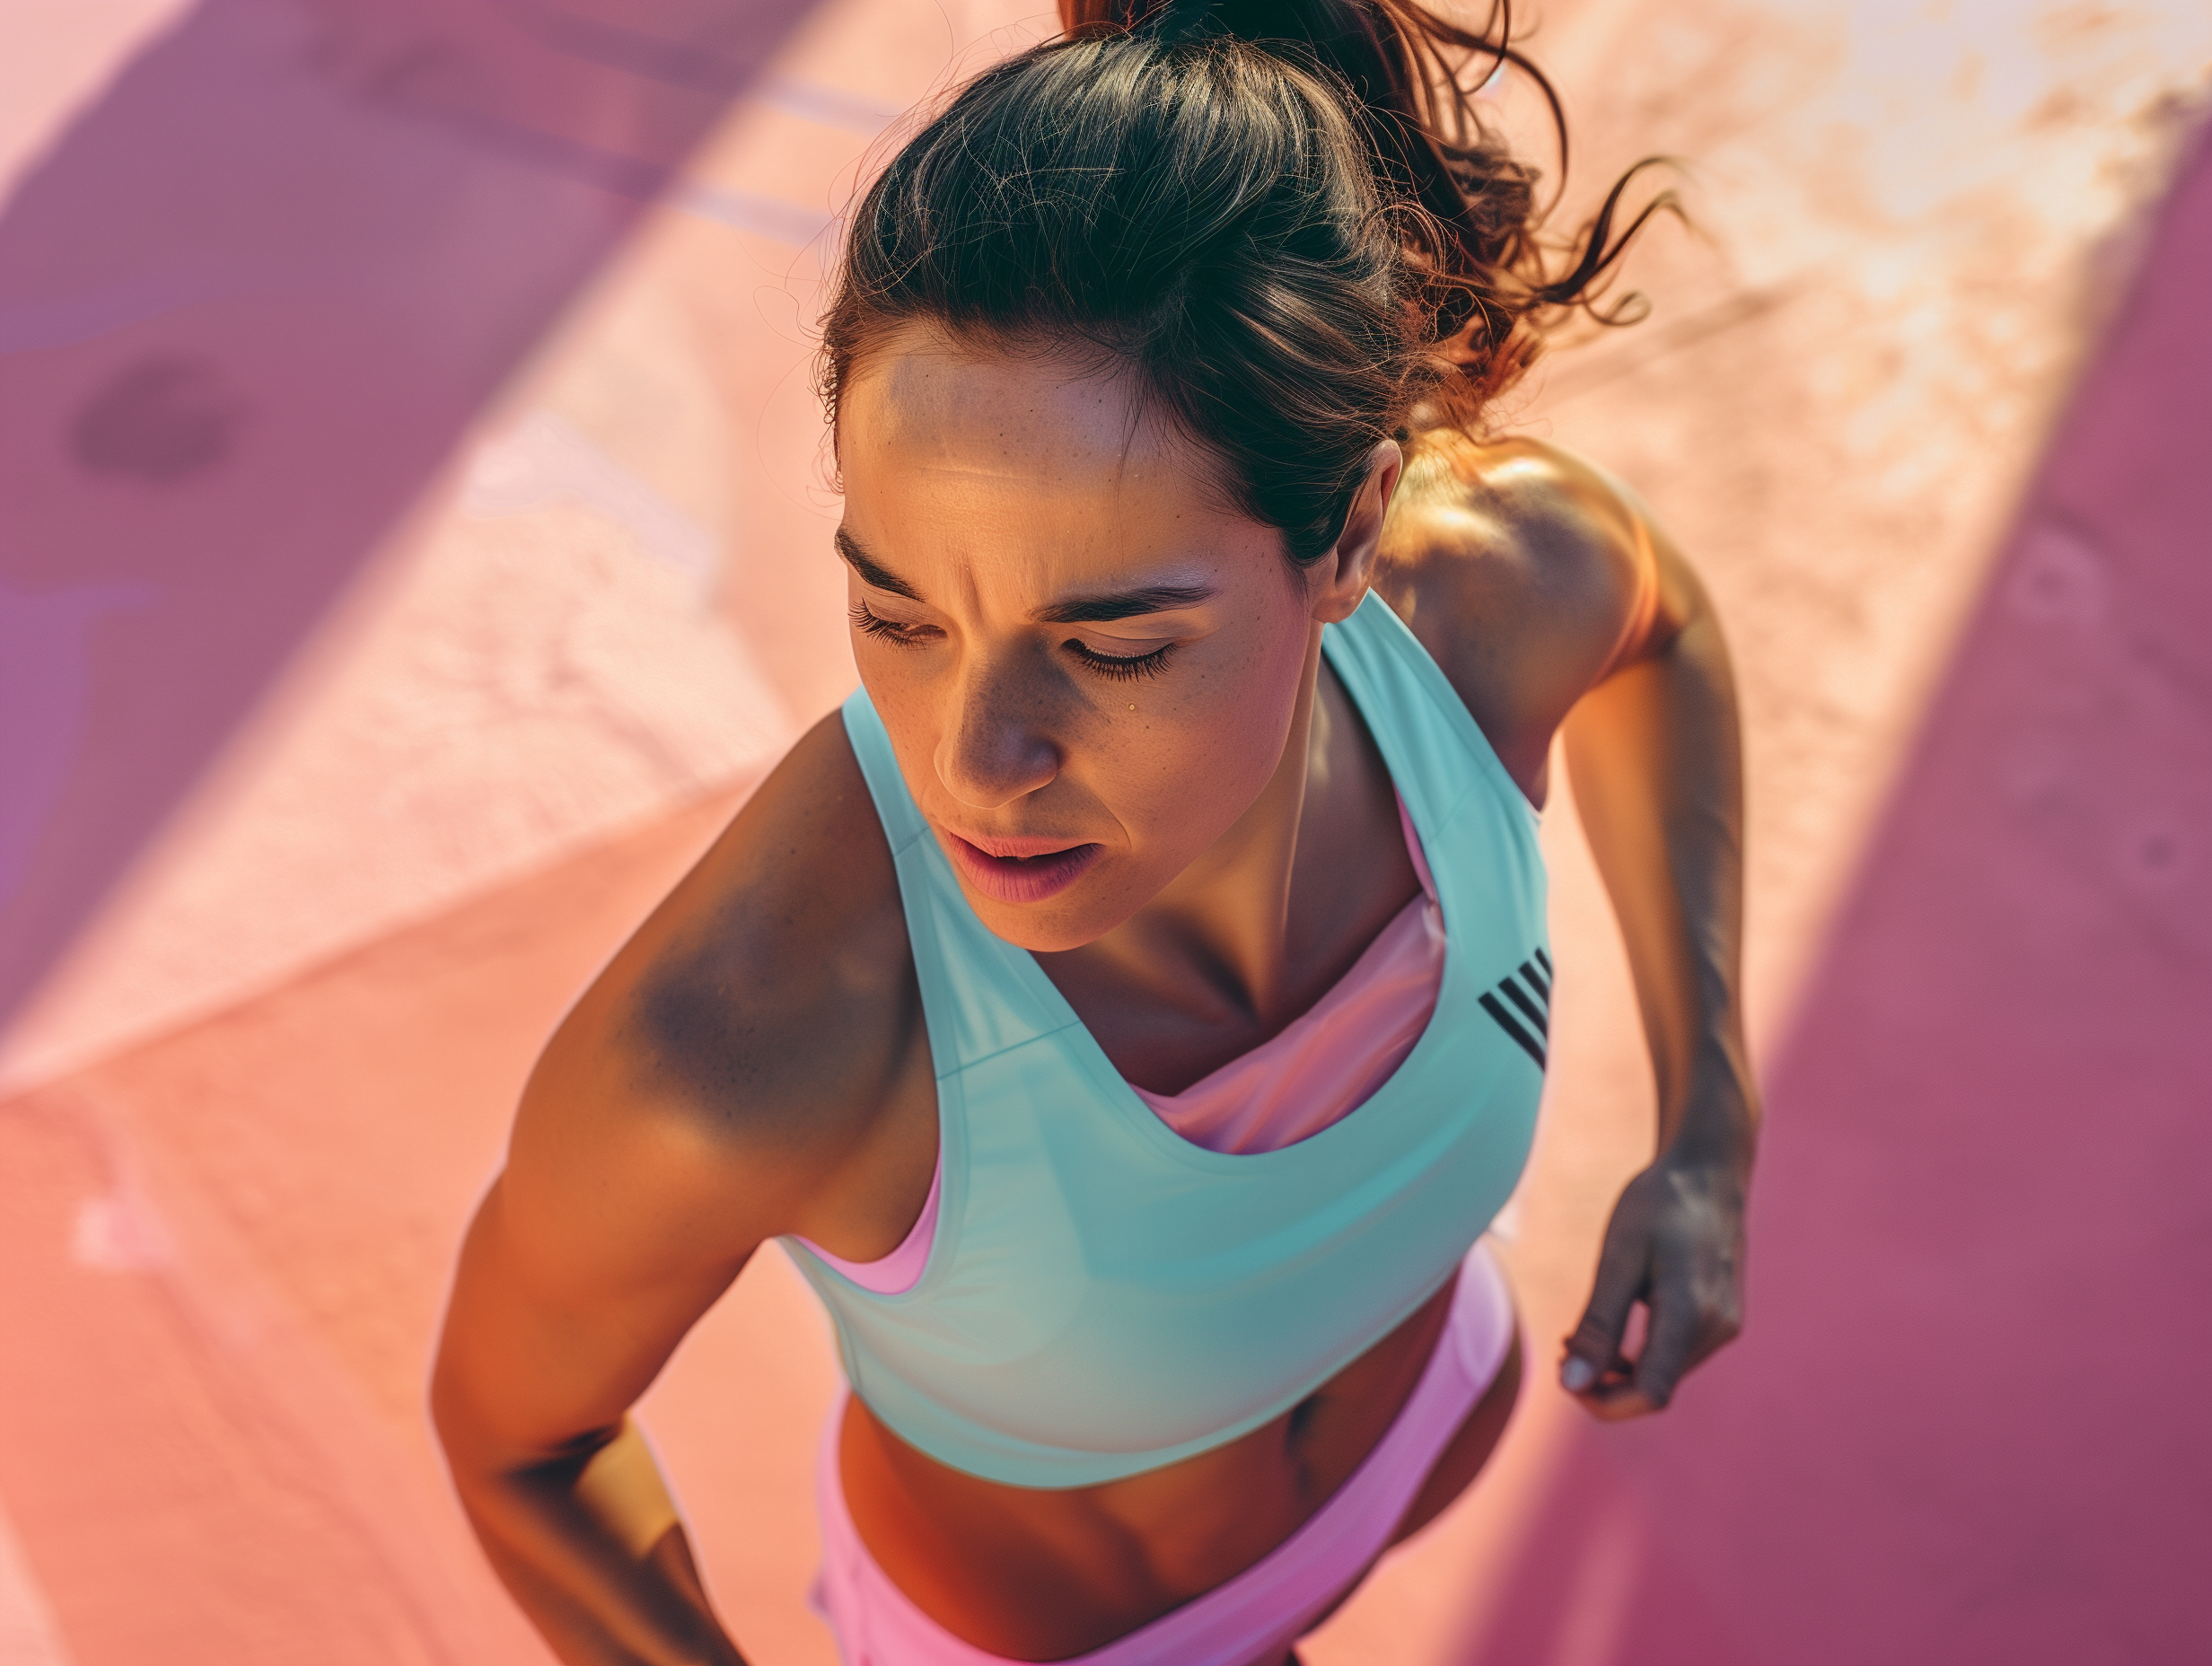 A determined young woman running on a pink athletic track, captured from above. She is wearing a light blue sports bra and pink shorts, her hair tied back in a ponytail. The image emphasizes the importance of staying hydrated and maintaining a consistent fitness routine, highlighting a proactive approach to health and wellness for busy women.